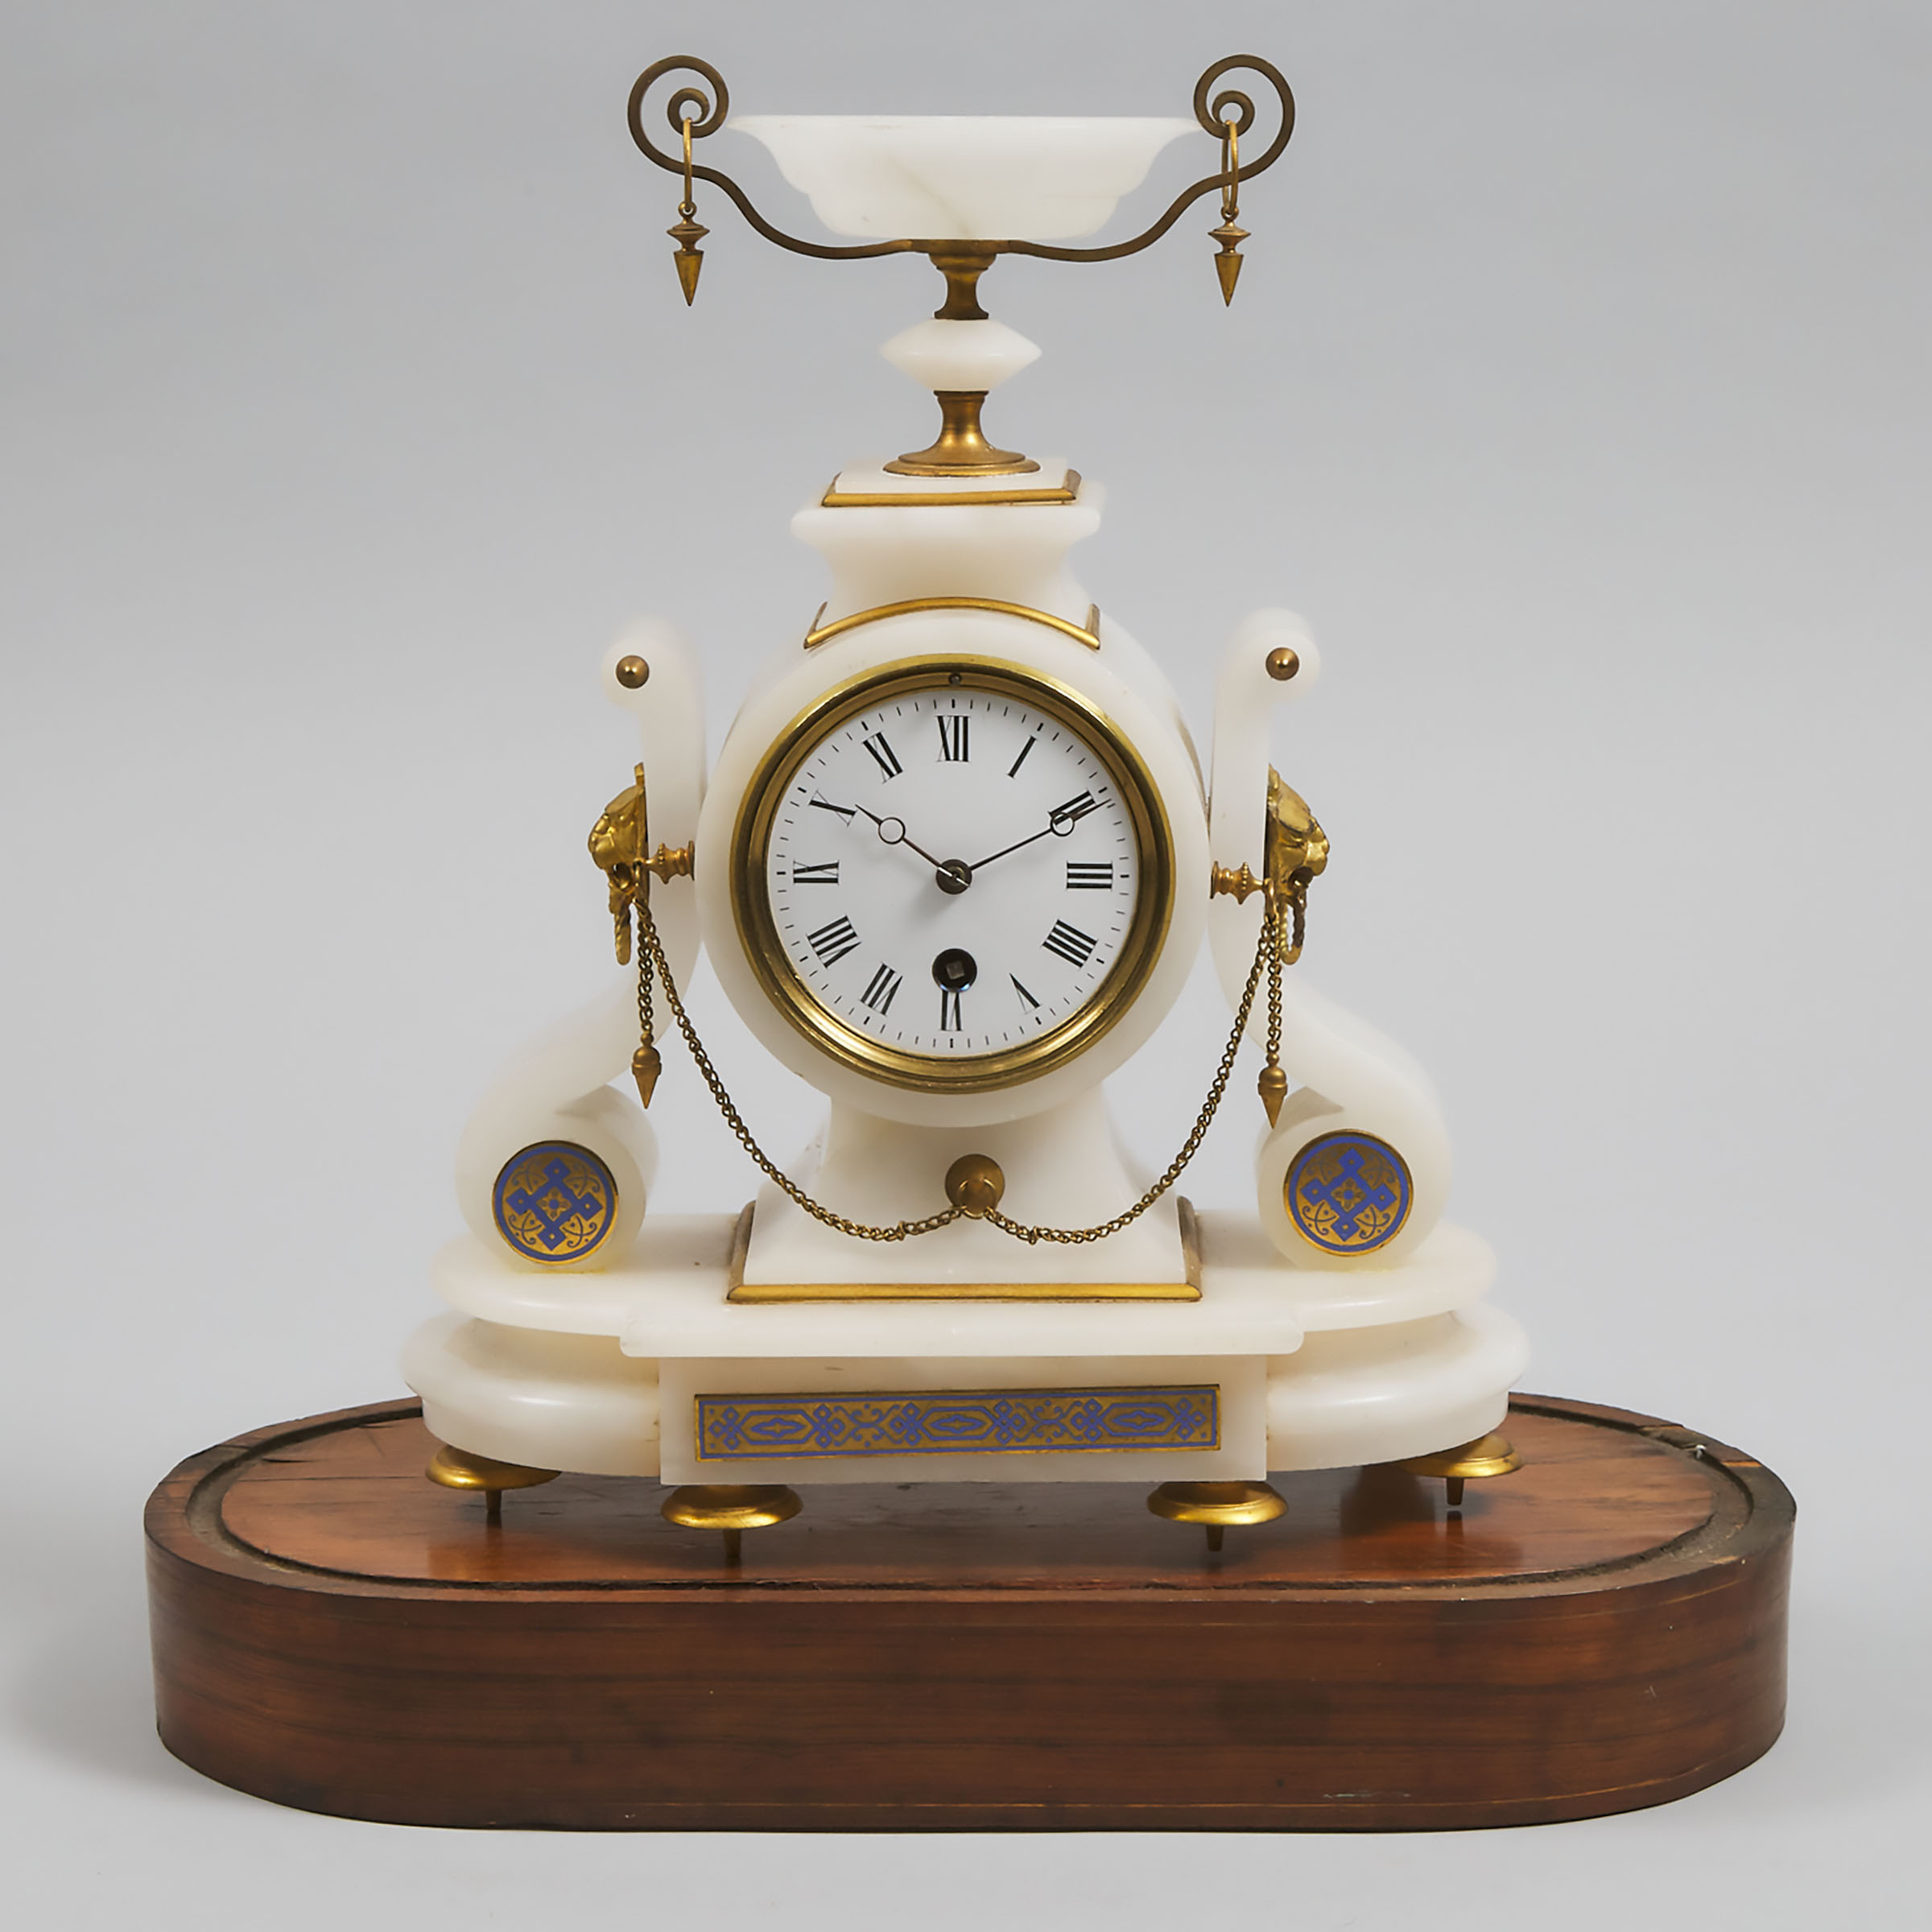 French Enamelled and Gilt Bronze Mounted Alabaster Mantel Clock, c.1870